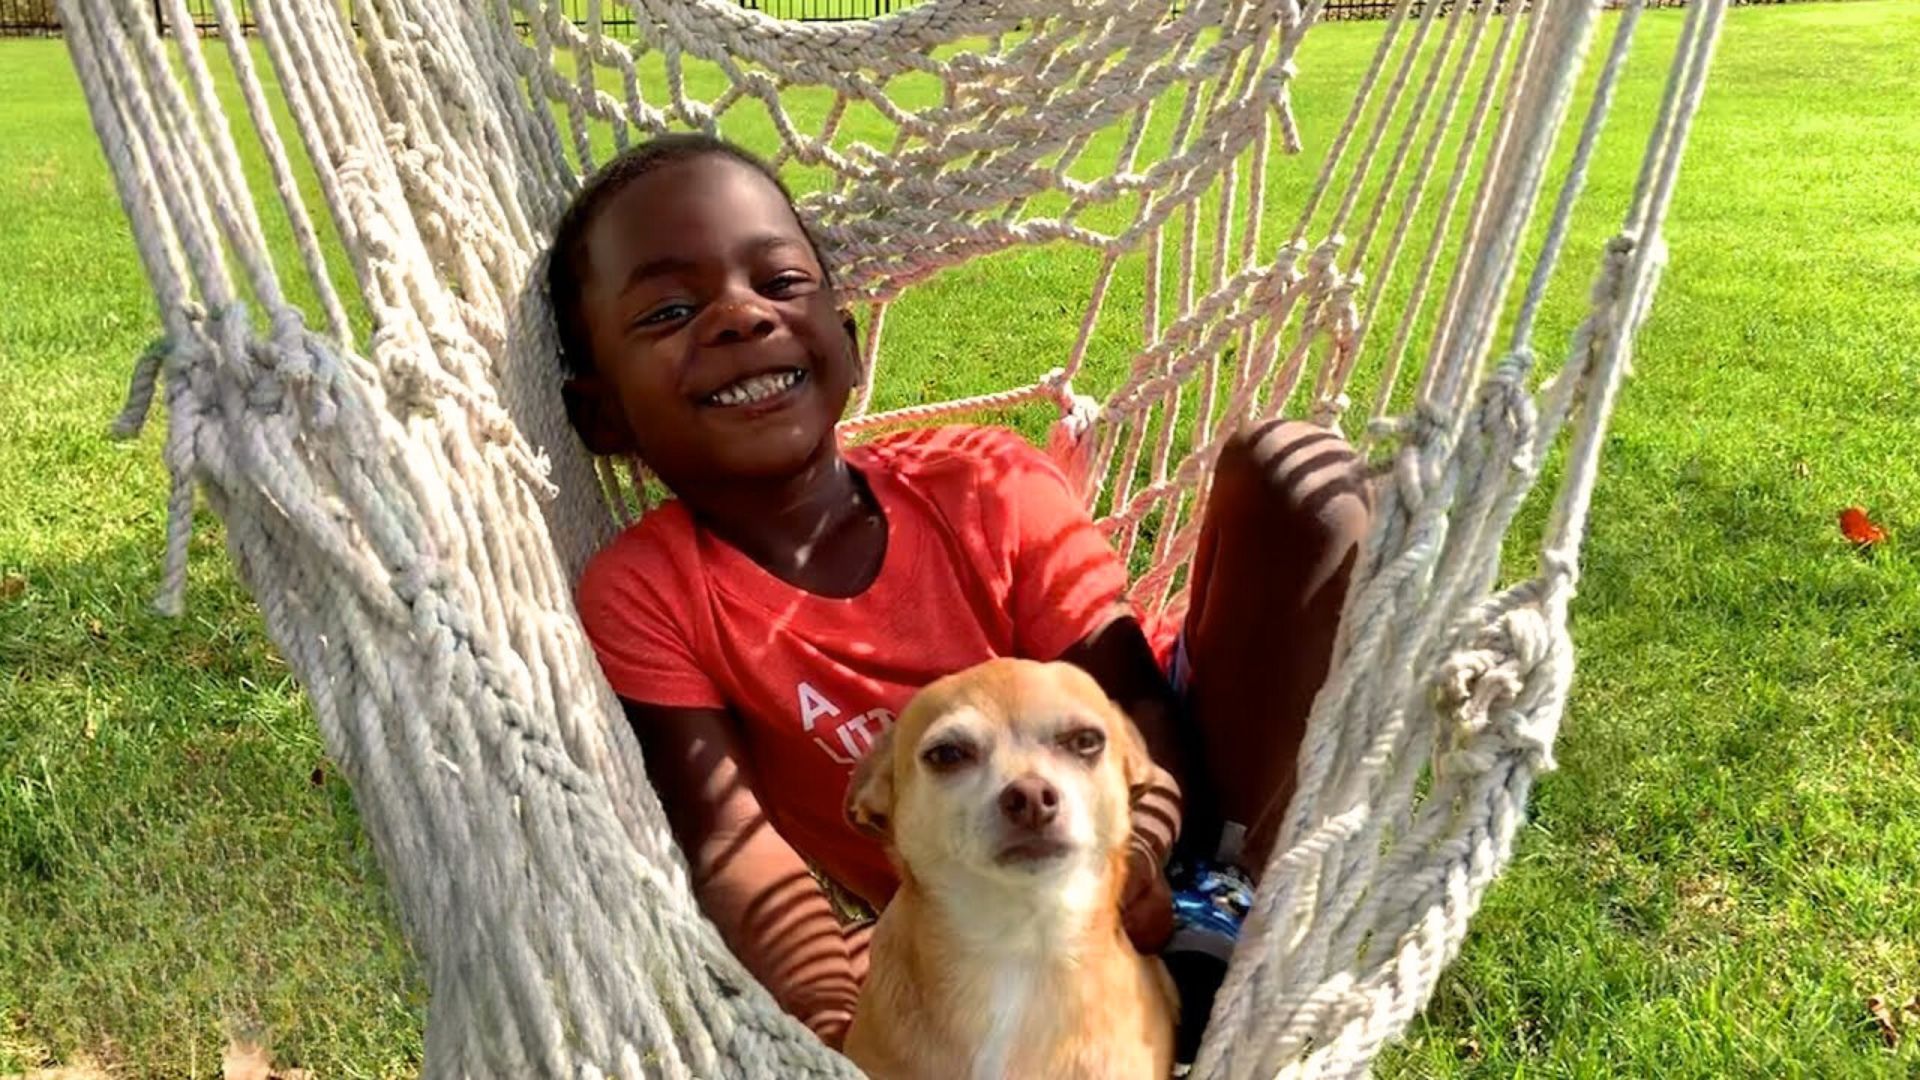 Boy Wrote A Heartwarming Letter To His Blind Dog To Repay Her For All Her Love